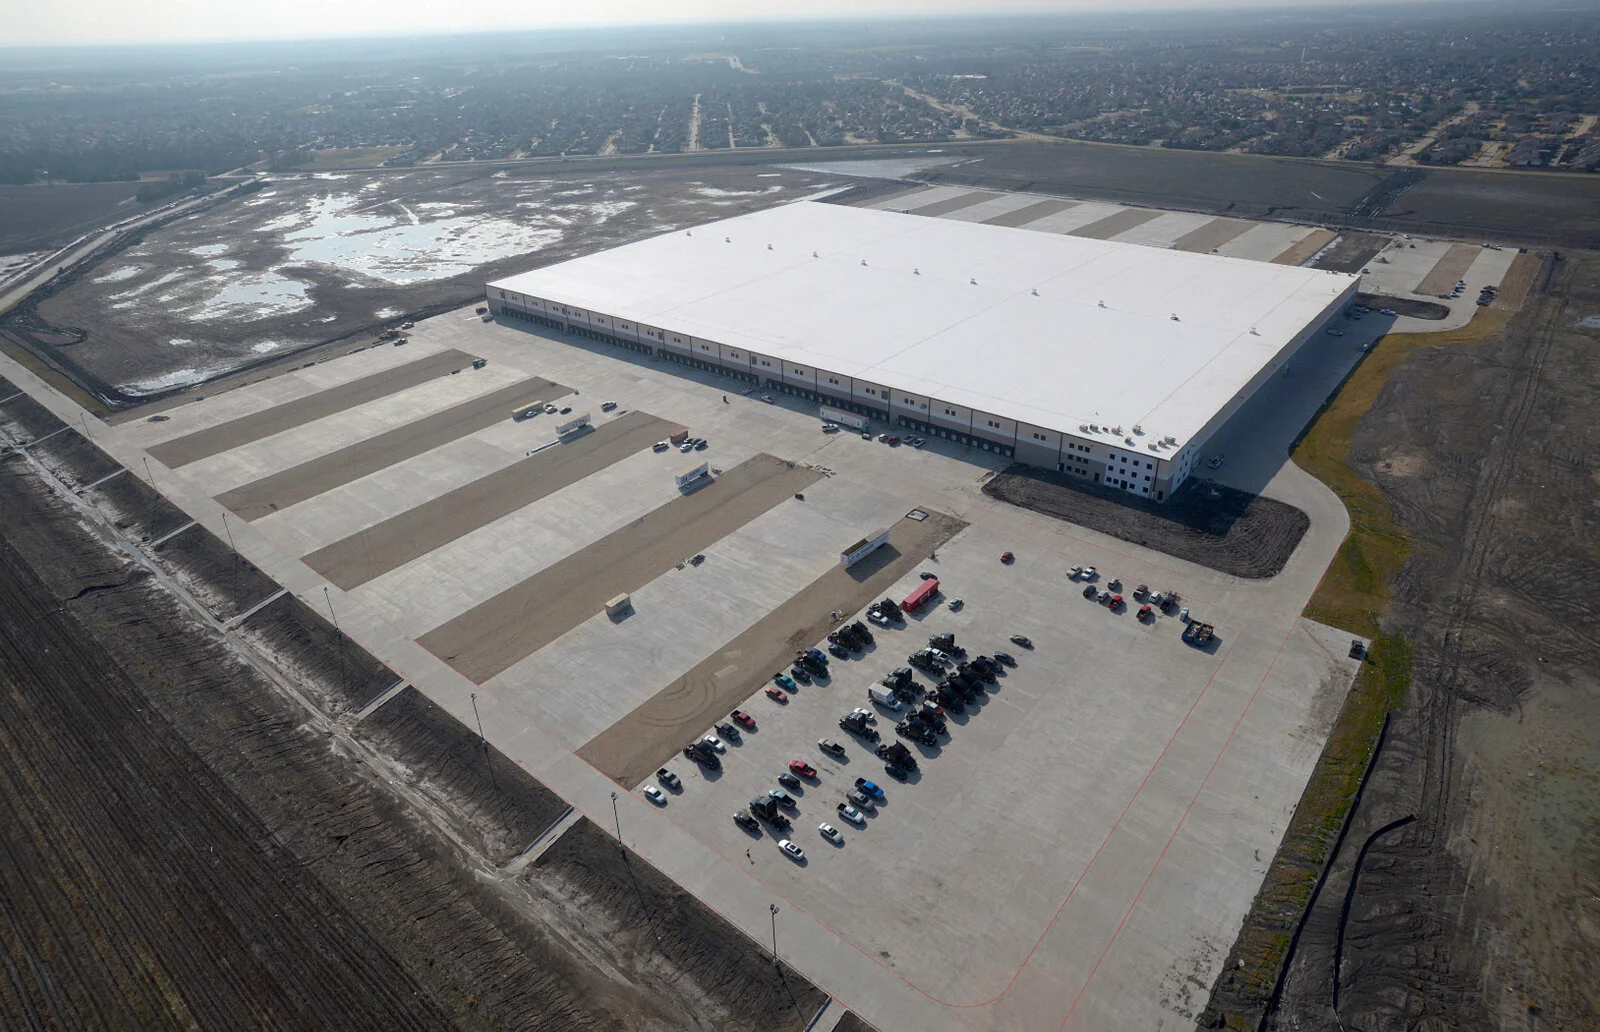 Ashley furniture aerial view, parking lot, city in distance, sunny day, trucks in loading bays.